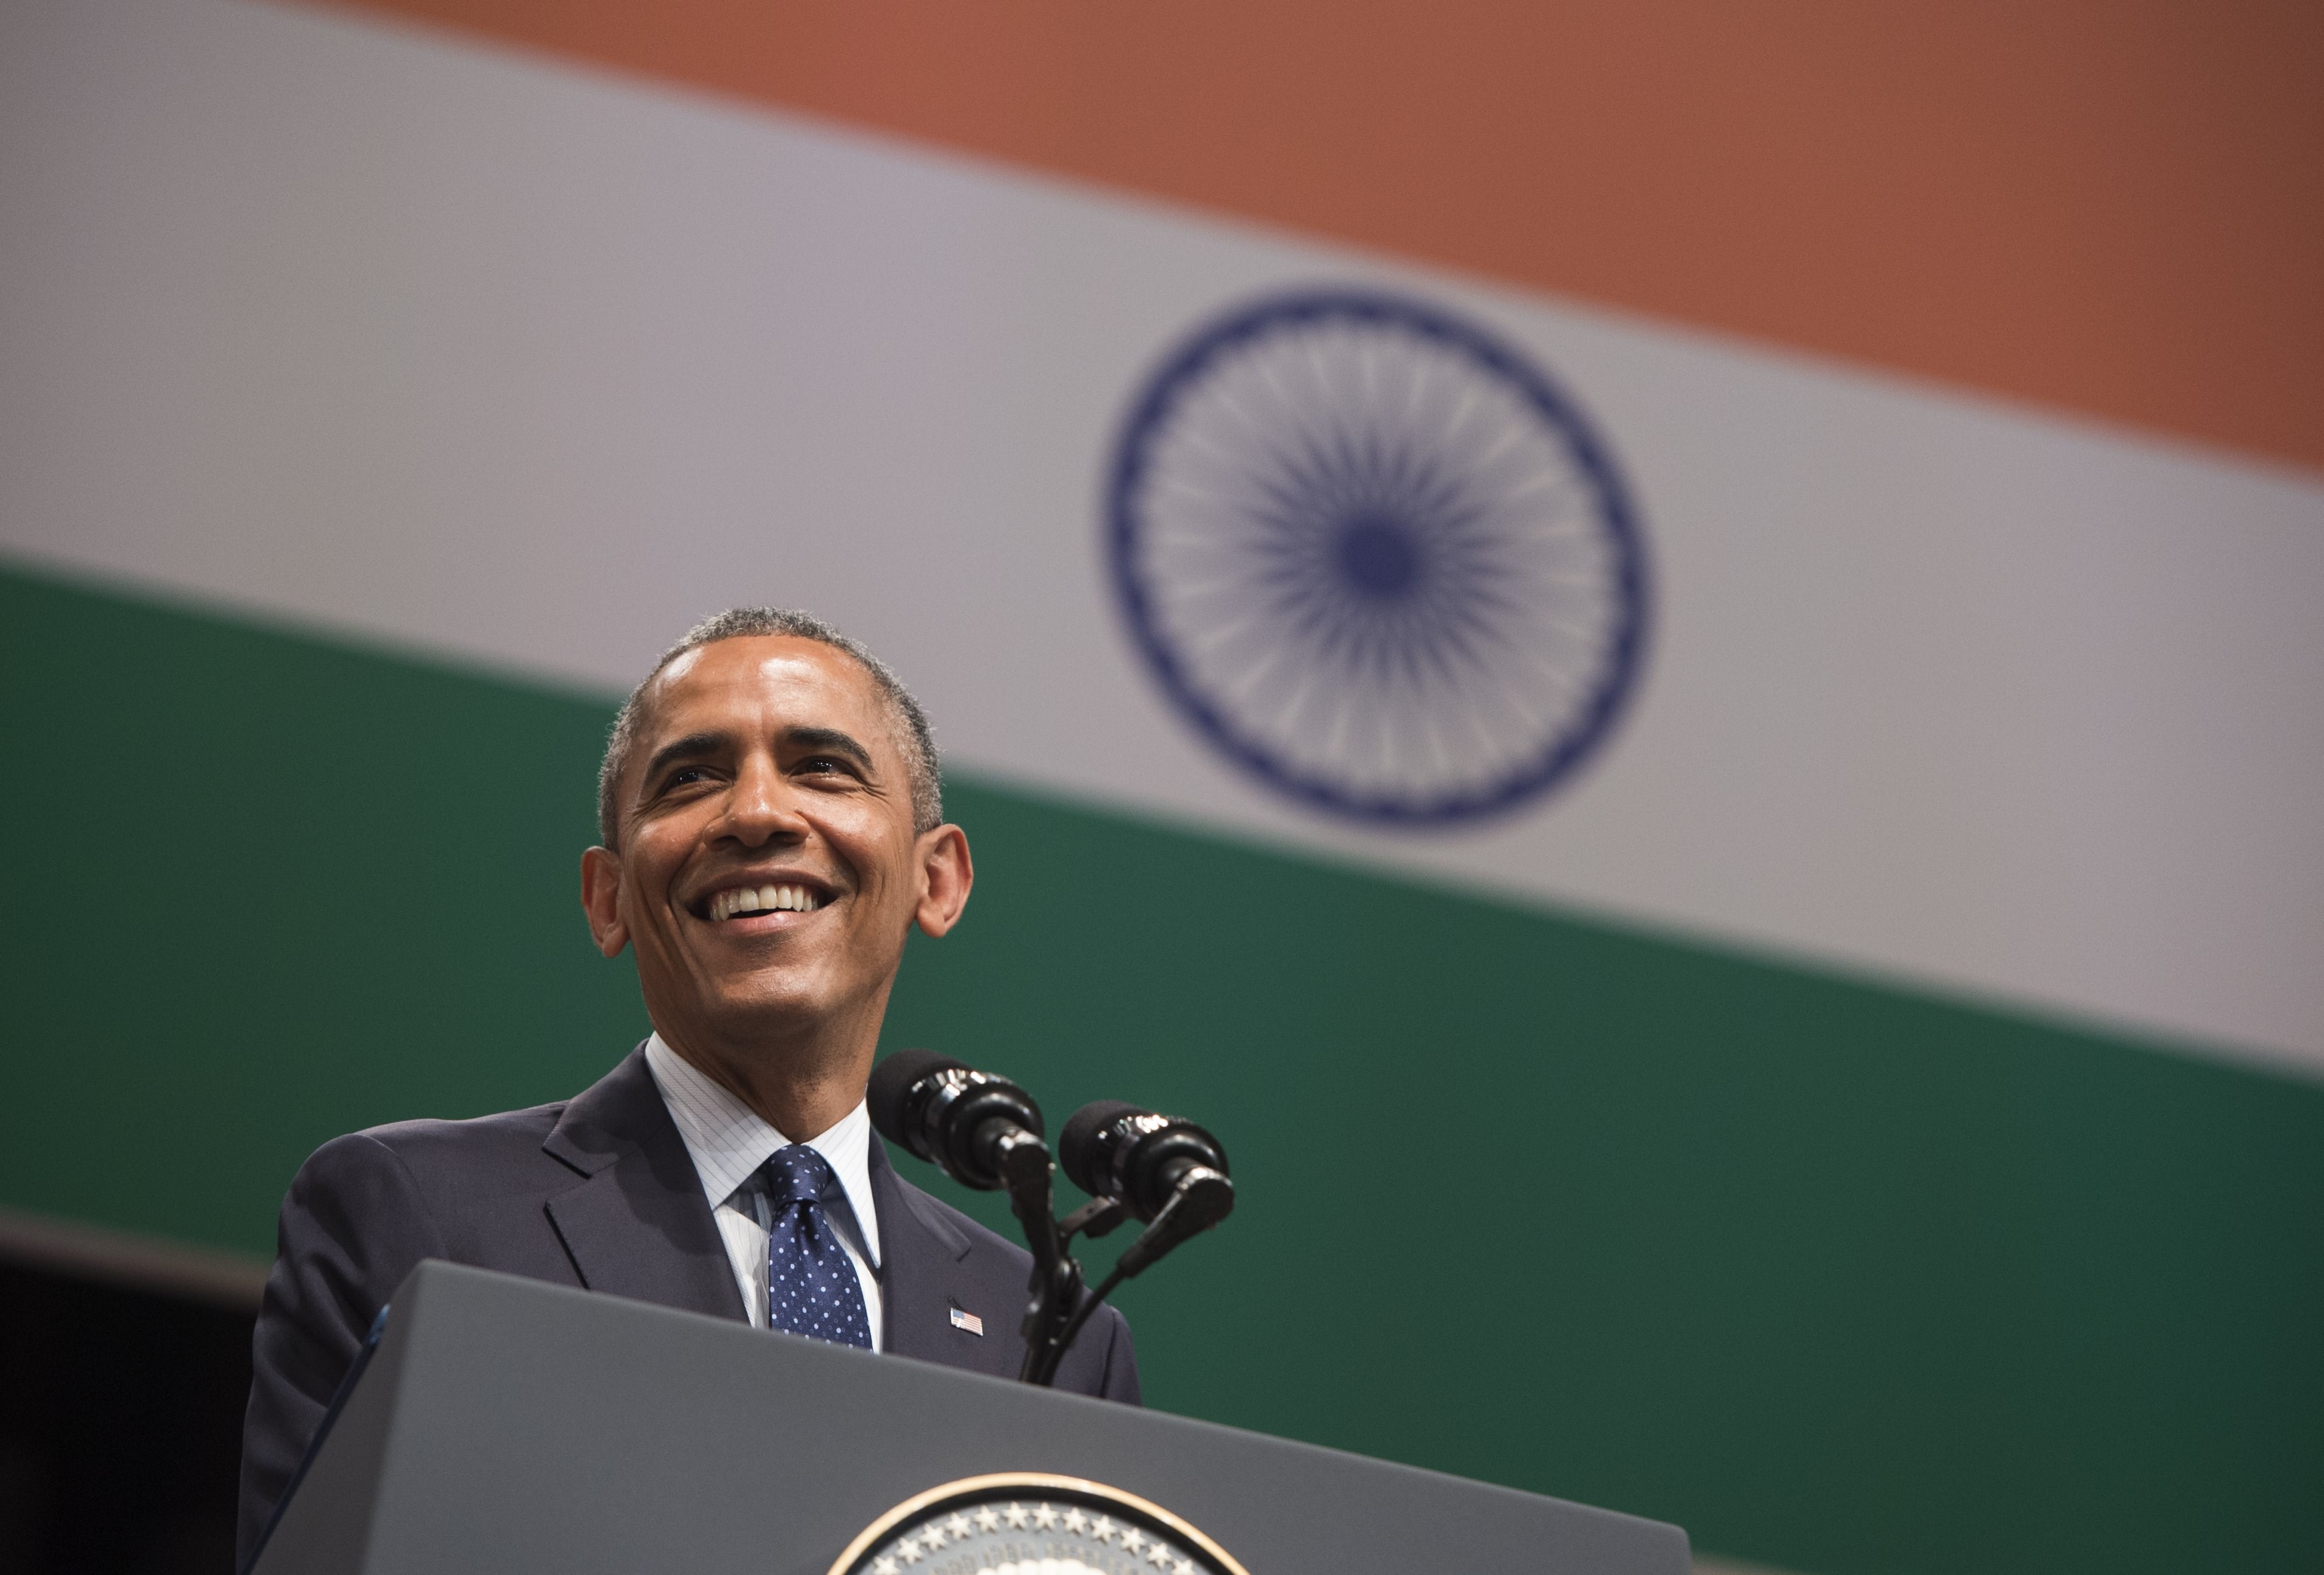 US President Barack Obama speaks on US - India relations during a townhall event at Siri Fort Auditorium in New Delhi on January 27, 2015. US President Barack Obama warned January 27 that the world does not "stand a chance against climate change" unless developing countries such as India reduce their dependence on fossil fuels. AFP PHOTO / SAUL LOEB        (Photo credit should read SAUL LOEB/AFP/Getty Images)